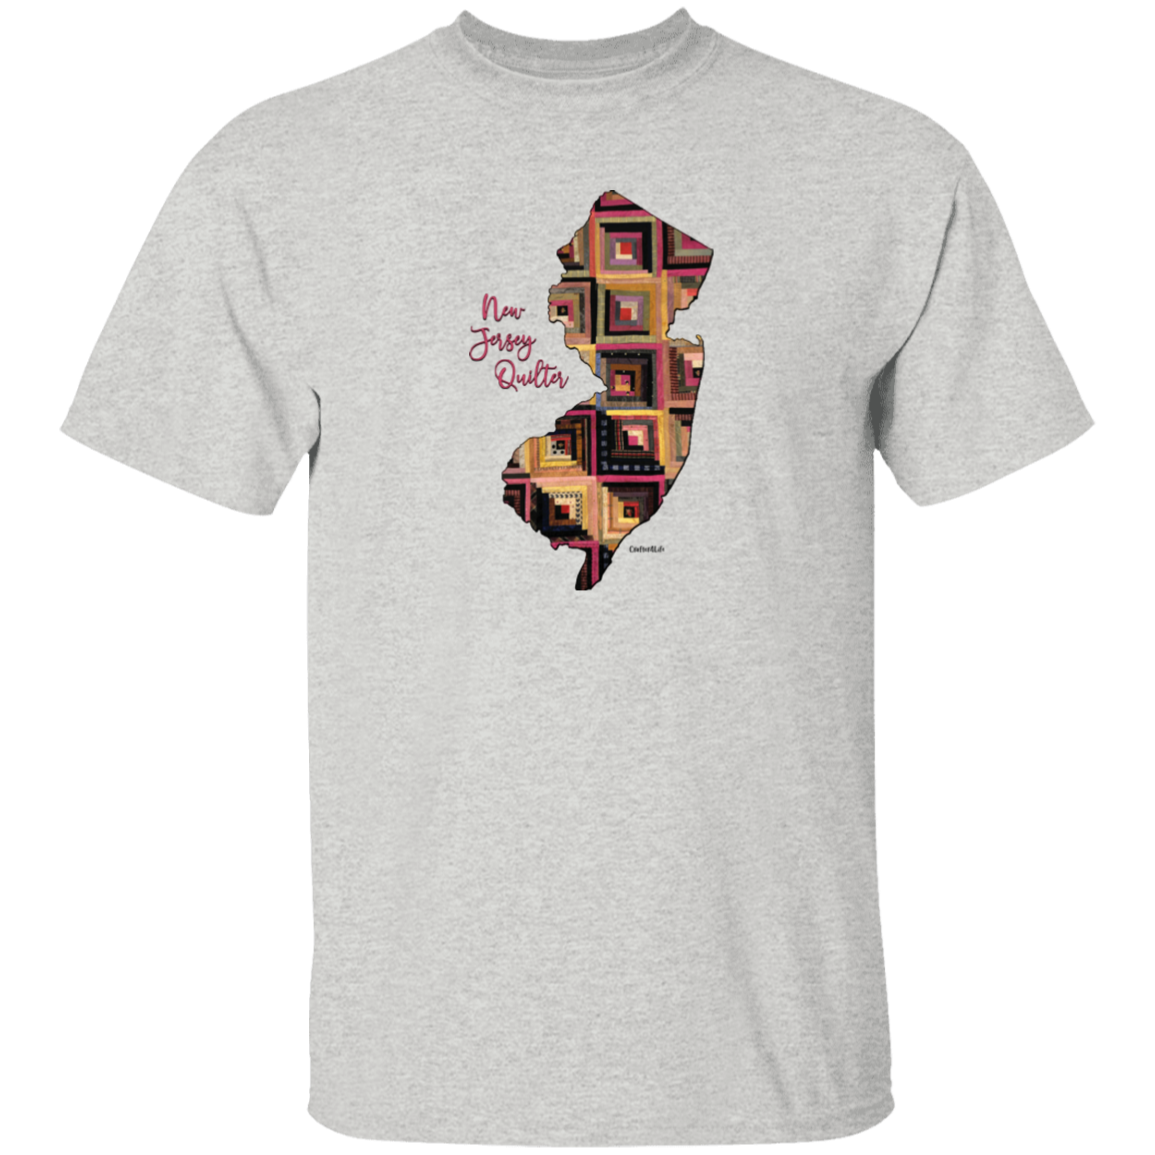 New Jersey Quilter T-Shirt, Gift for Quilting Friends and Family